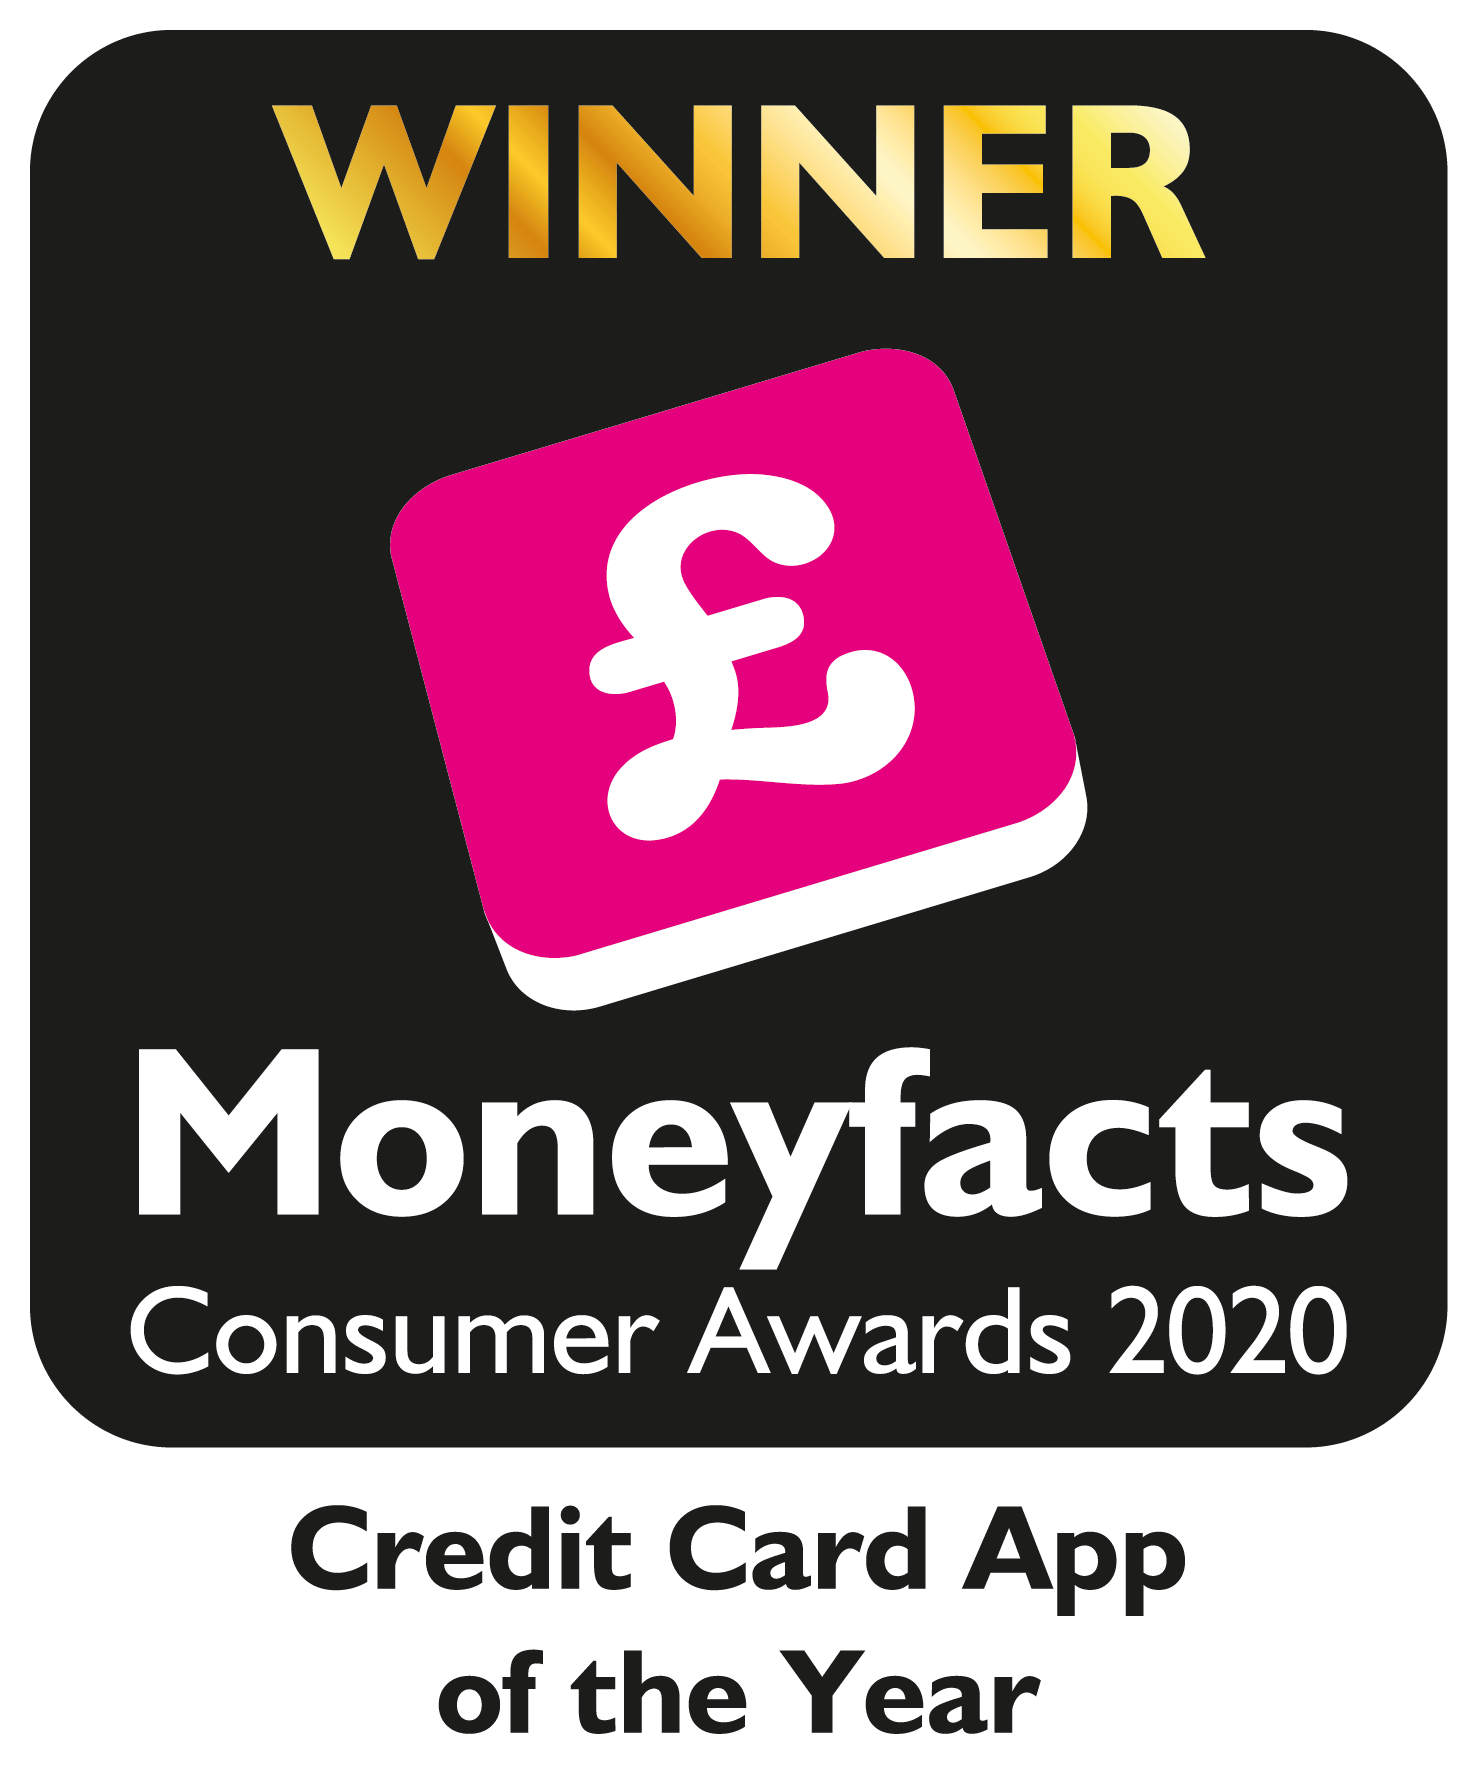 Moneyfacts awards badge - credit card app of the year 2020